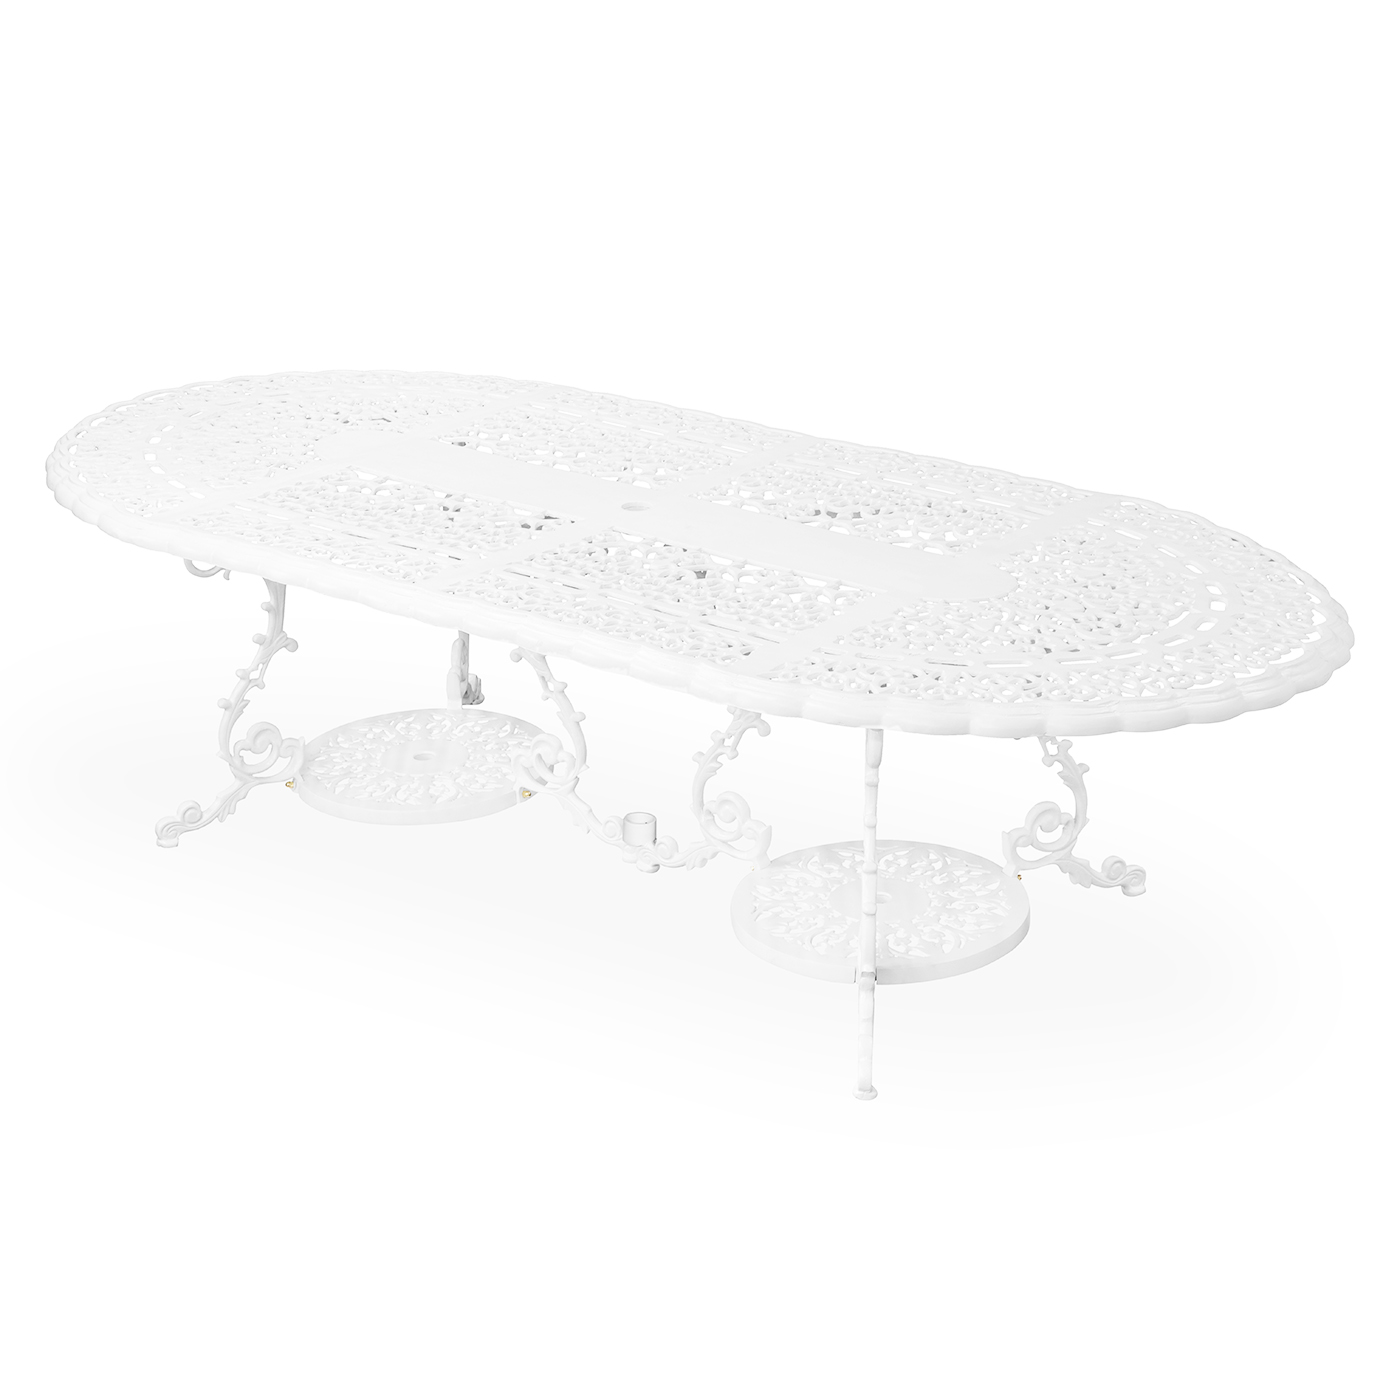 Victorian fatboy table in white